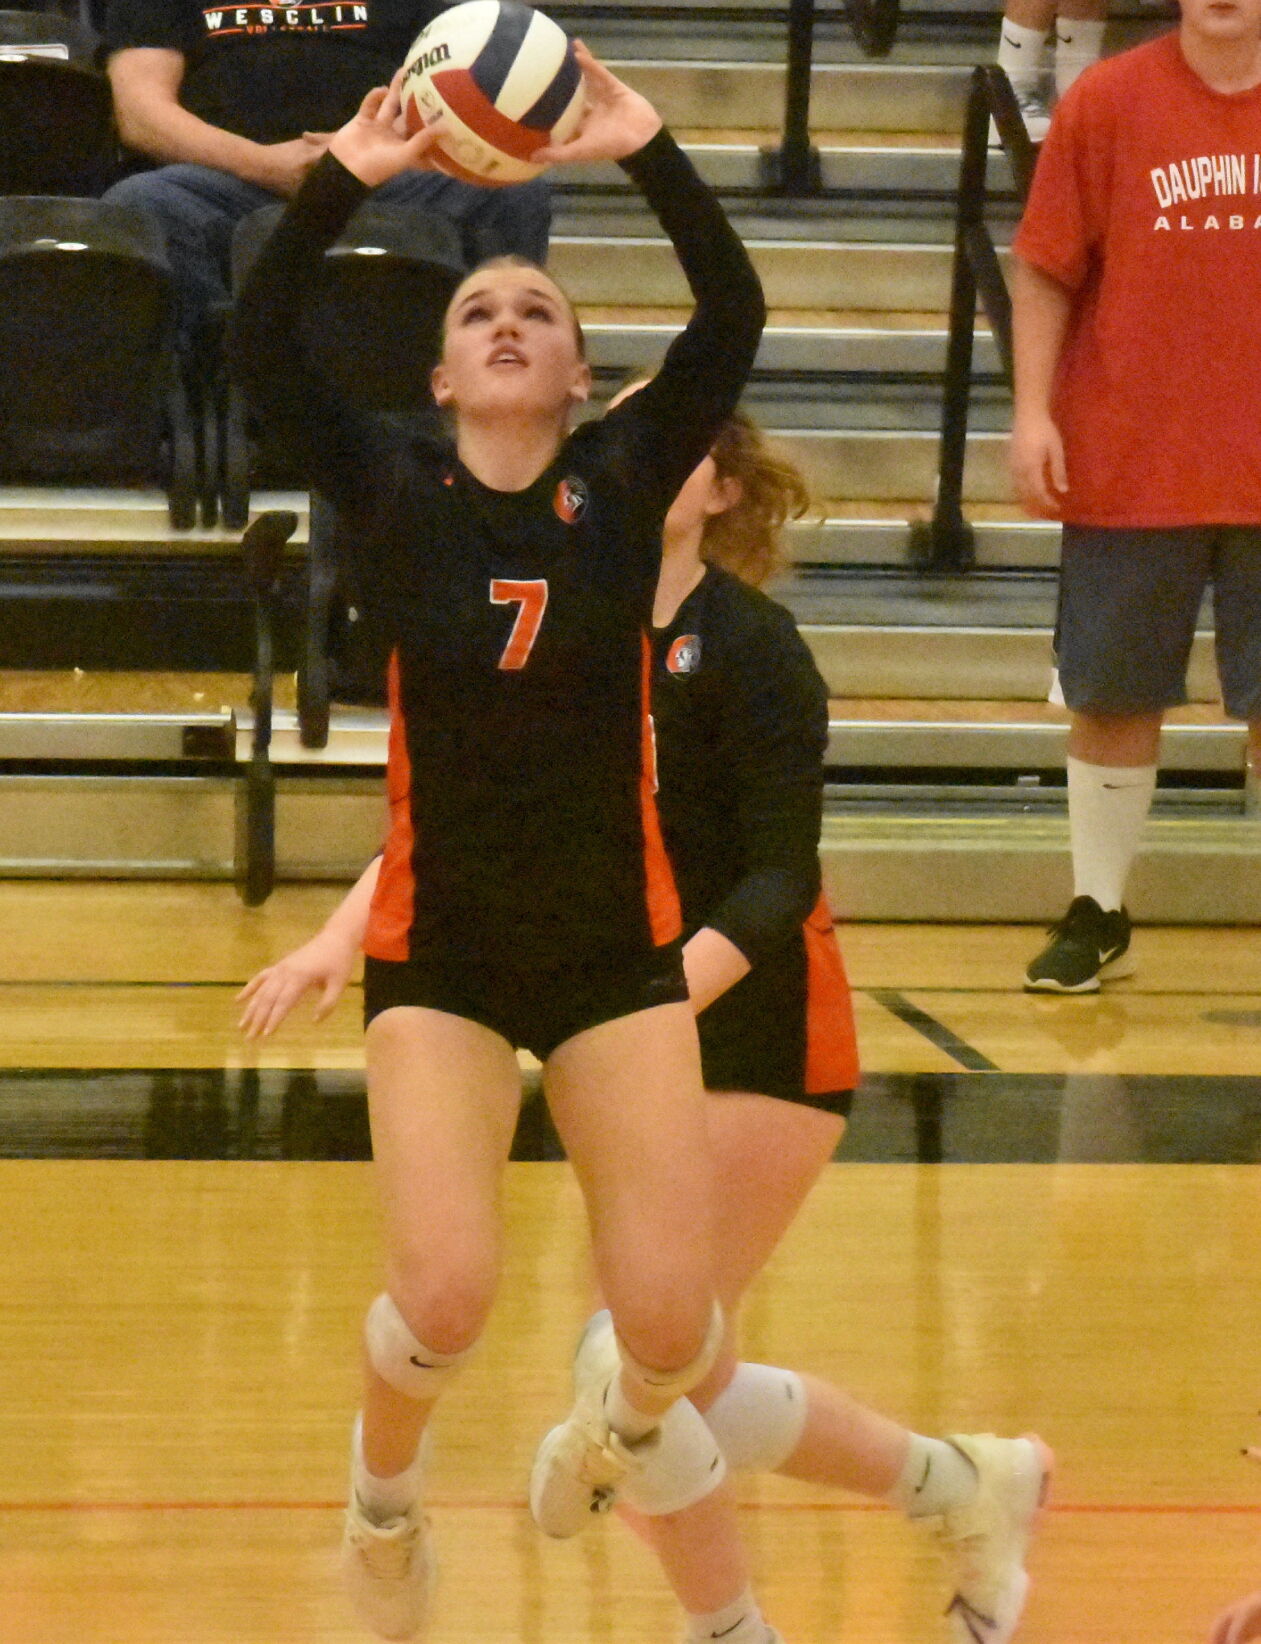 Wesclin Volleyball Team Achieves 7-2 Record in Conference with Victory Over Carlyle